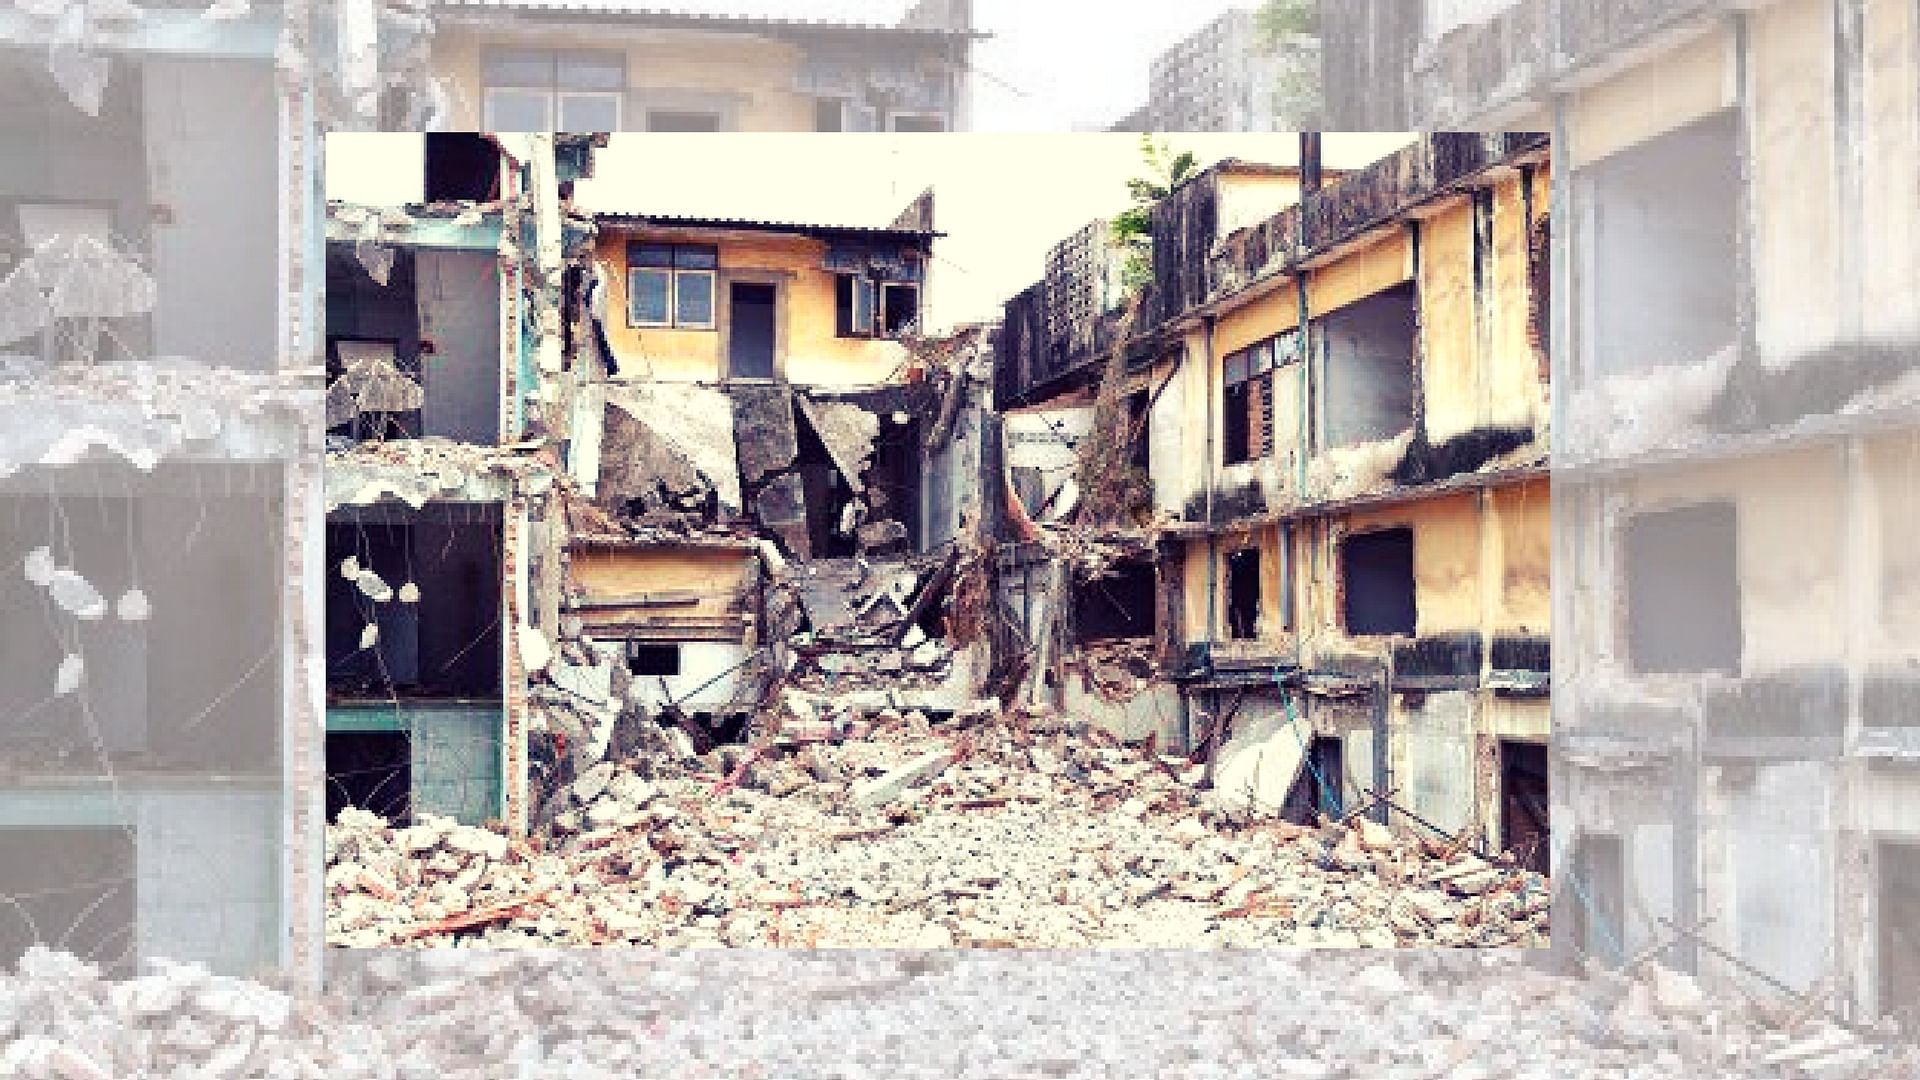 Part of the collapsed building in Bhiwandi. 